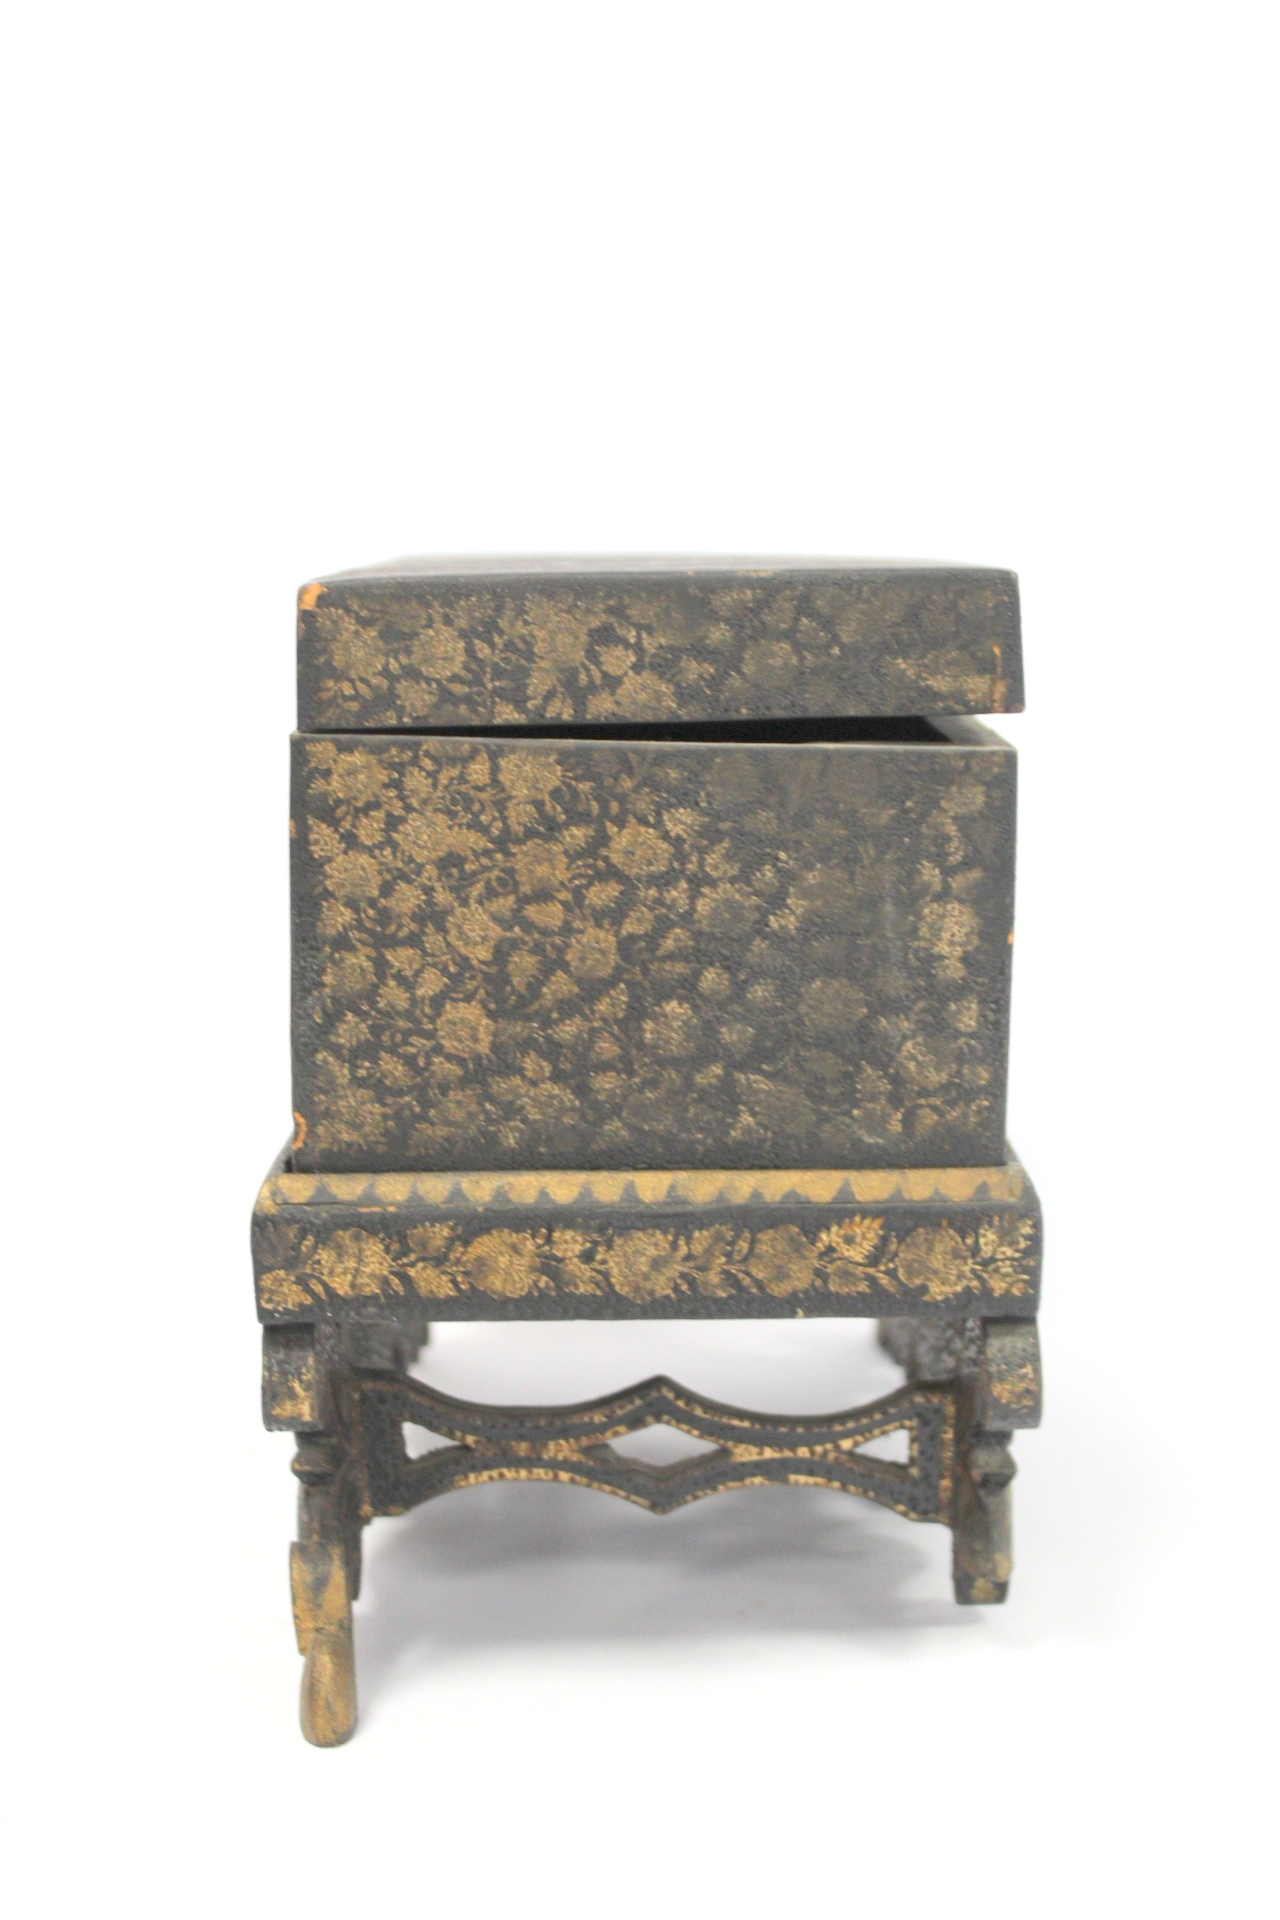 Early 19th century Chinese export black lacquer box on pierced stand with painted gilt floral and - Image 2 of 13